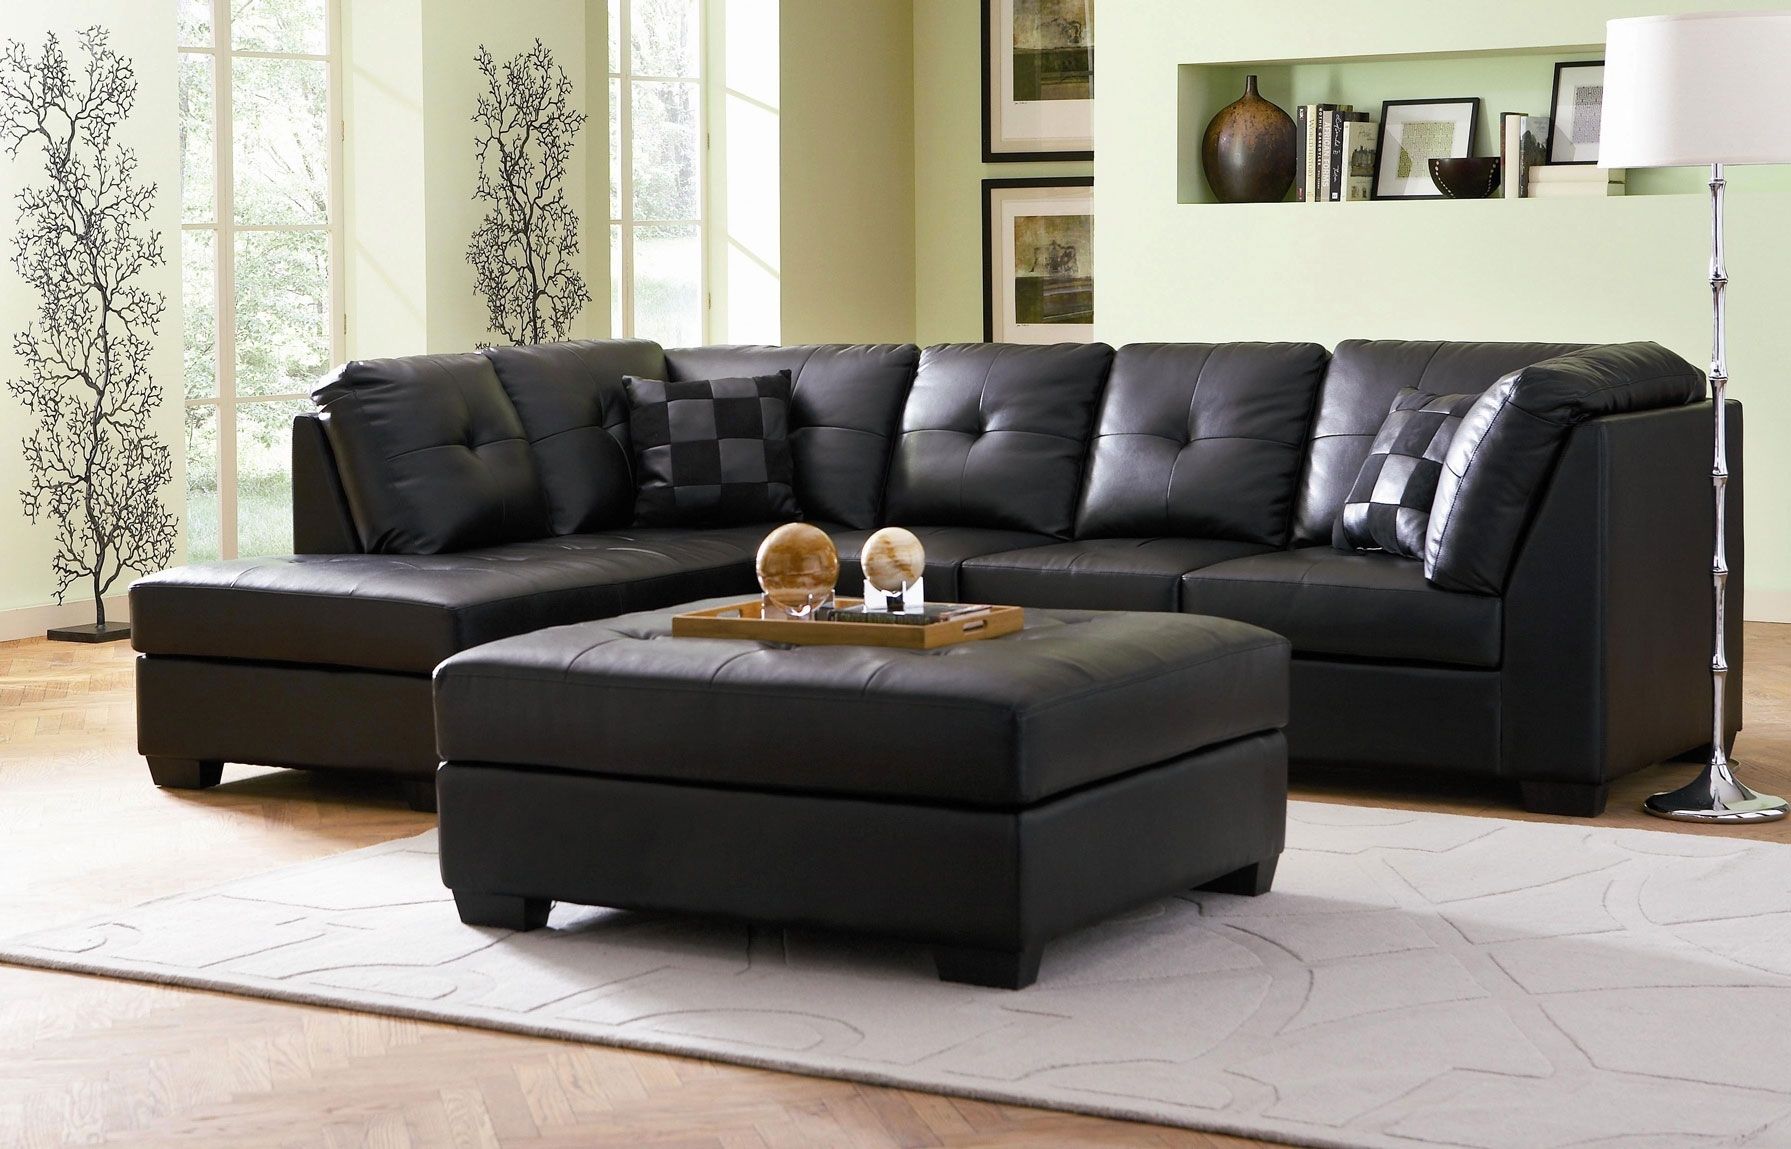 Sectional Sofa. The Best Sectional Sofas Charlotte Nc: Sectional With Regard To Sectional Sofas In Charlotte Nc (Photo 4 of 10)